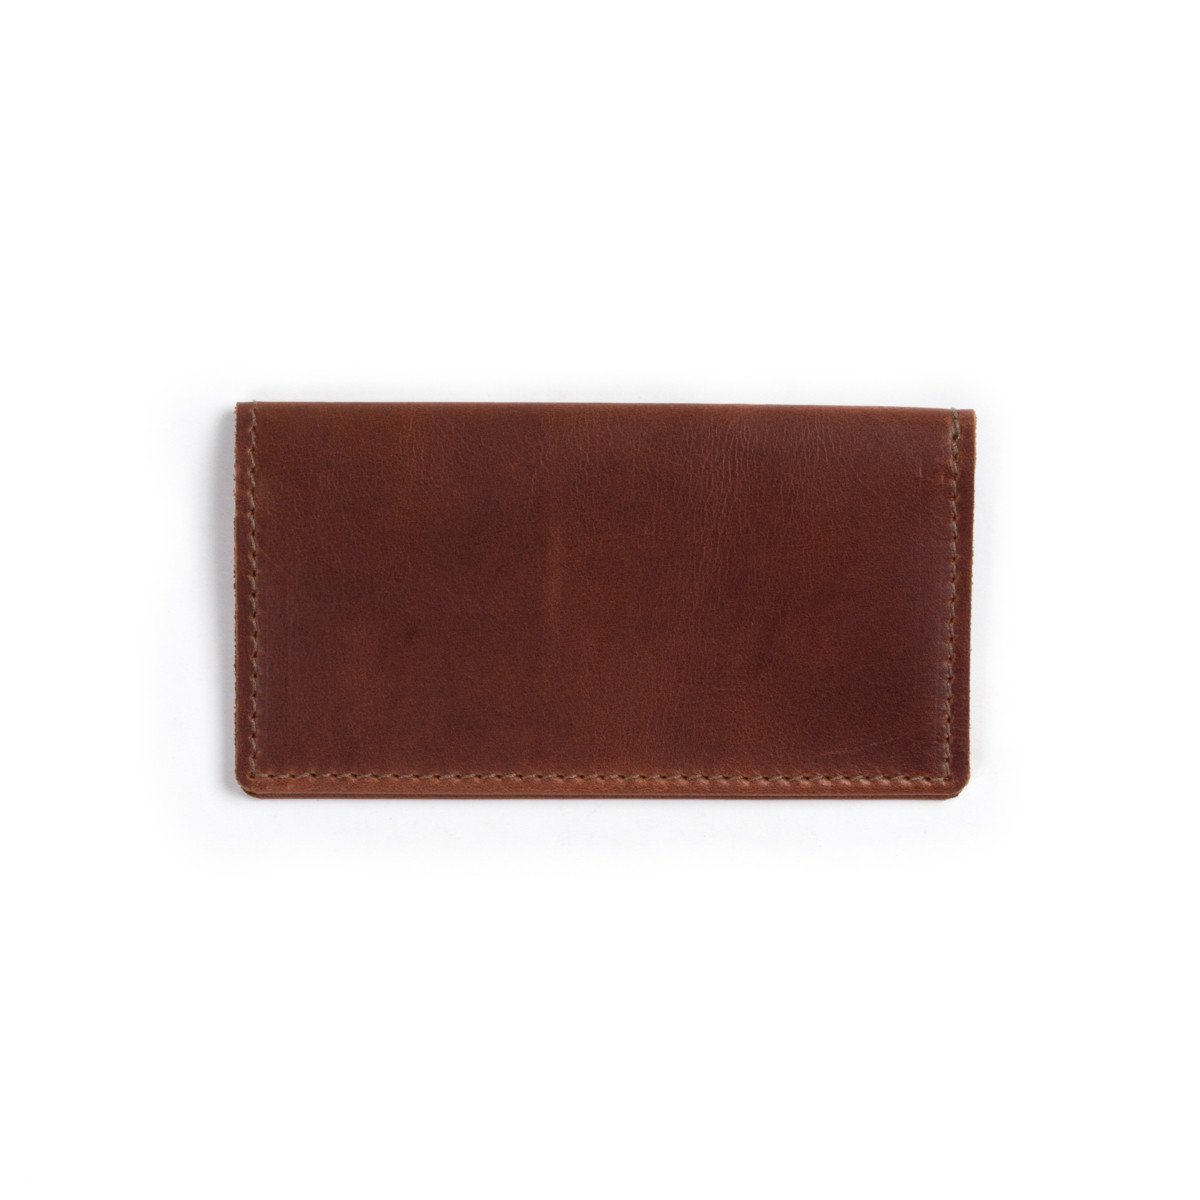 Checkbook Cover in Colorado Pebble Grain Leather – Real Leather Creations